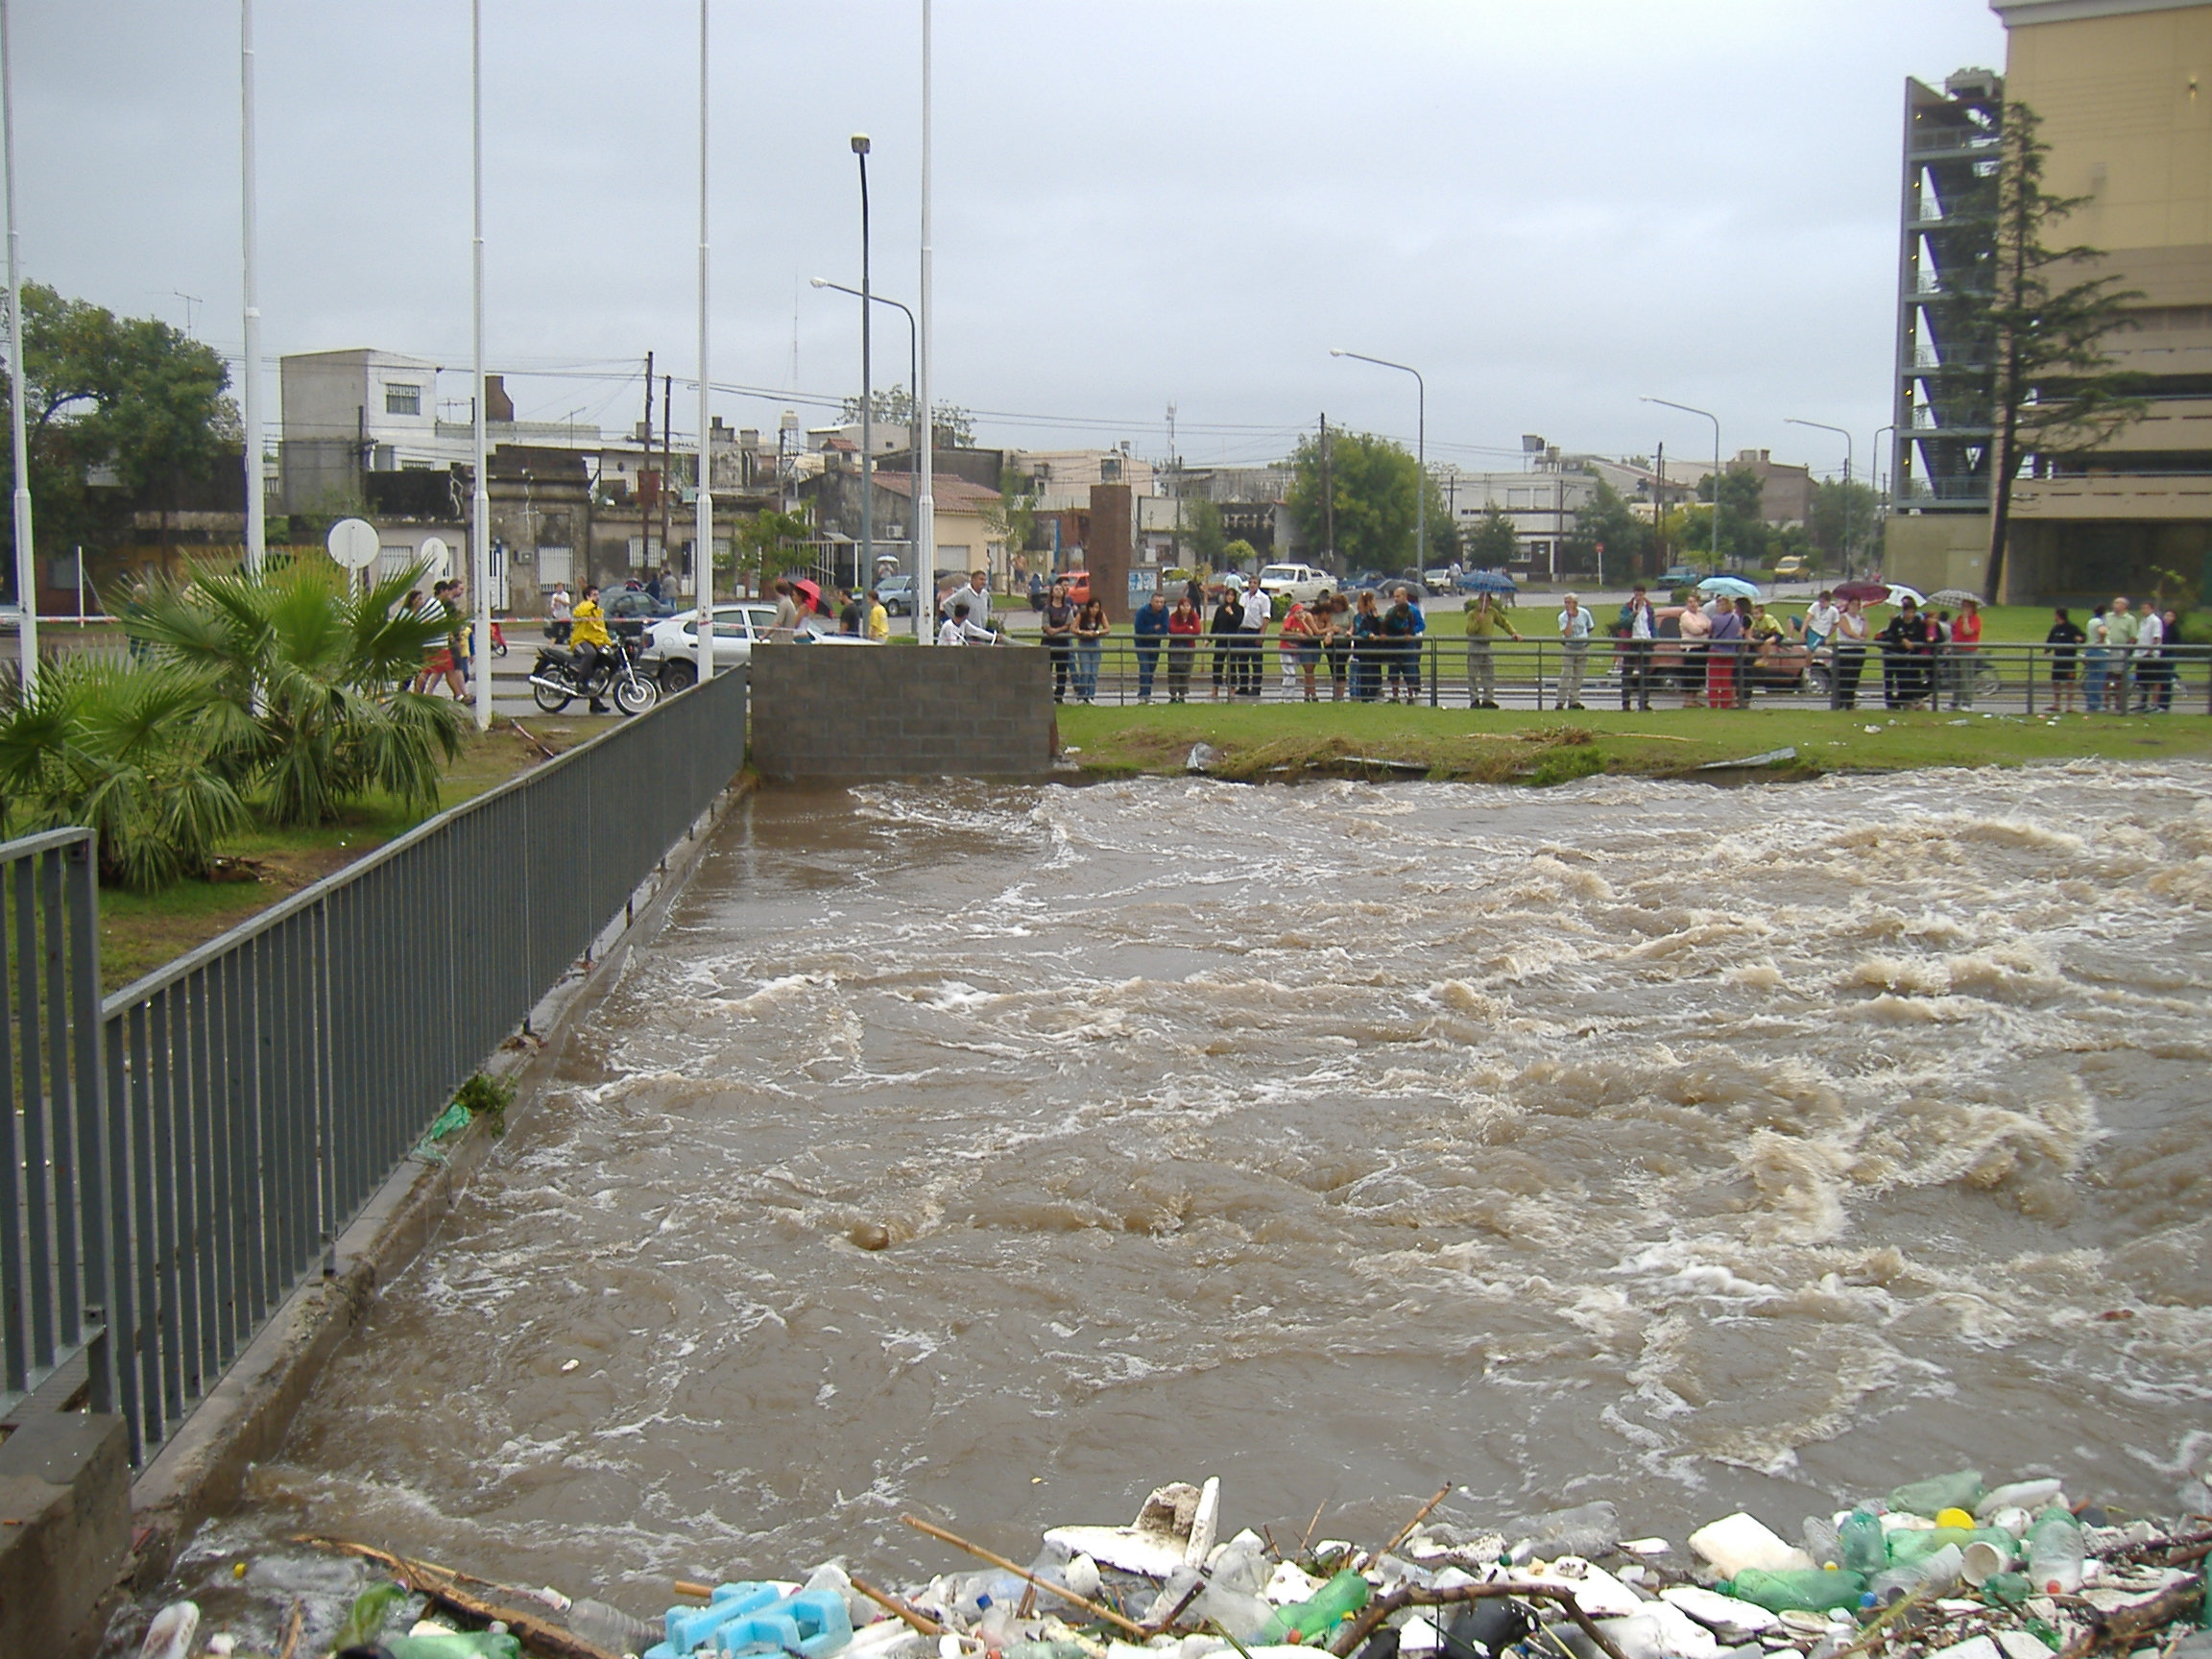 people gather on the edge of a flooding canal to look at the turbulent water